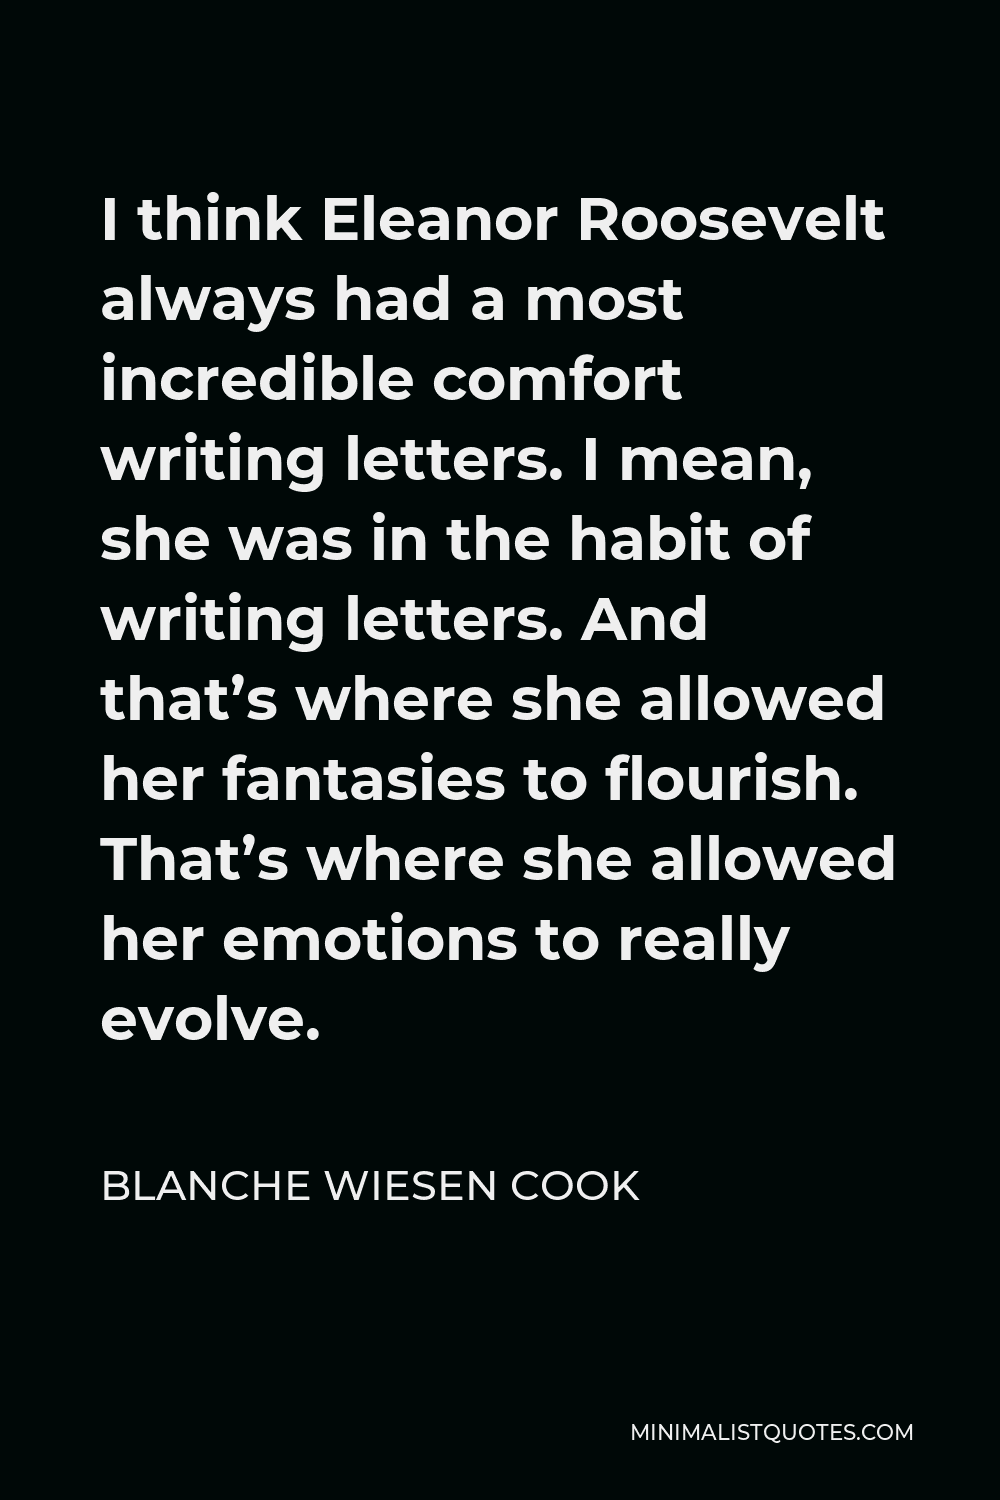 Blanche Wiesen Cook Quote - I think Eleanor Roosevelt always had a most incredible comfort writing letters. I mean, she was in the habit of writing letters. And that’s where she allowed her fantasies to flourish. That’s where she allowed her emotions to really evolve.